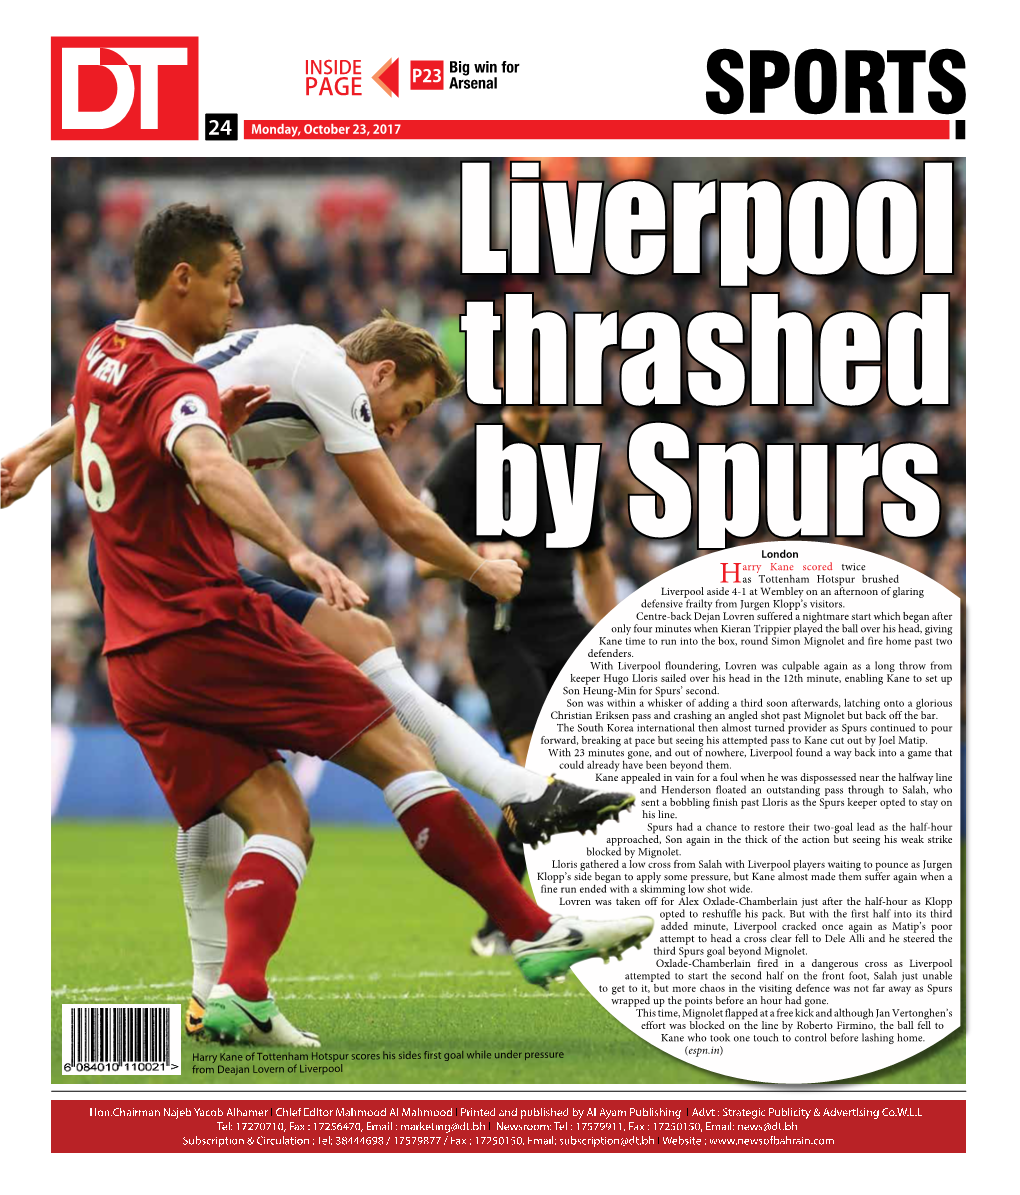 SPORTS 2424 Monday, October 23, 2017 Liverpool Thrashed